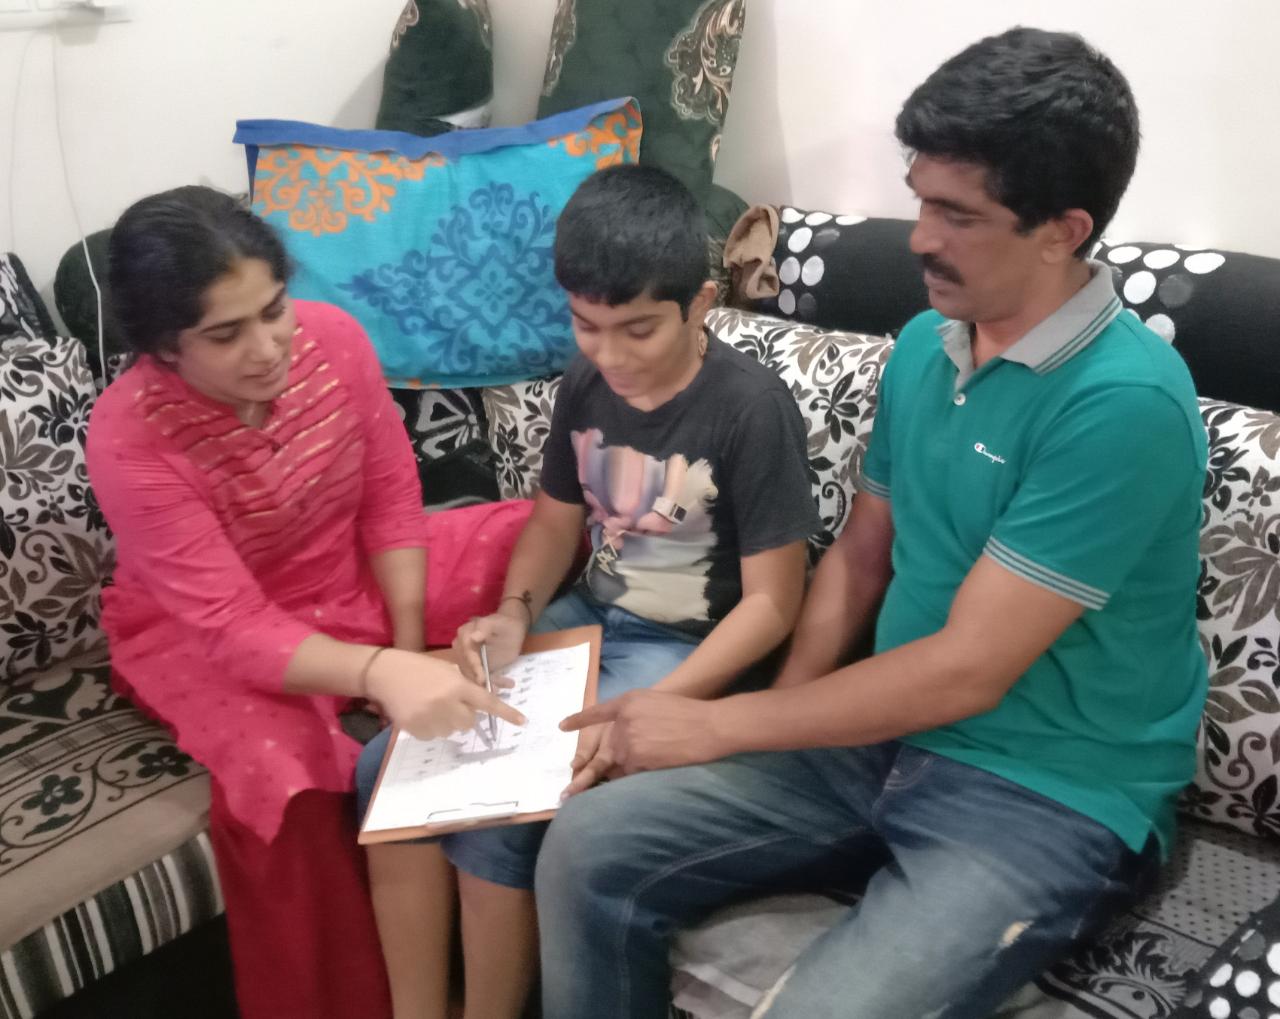 Imparting Life Skills at Home to Our Youth